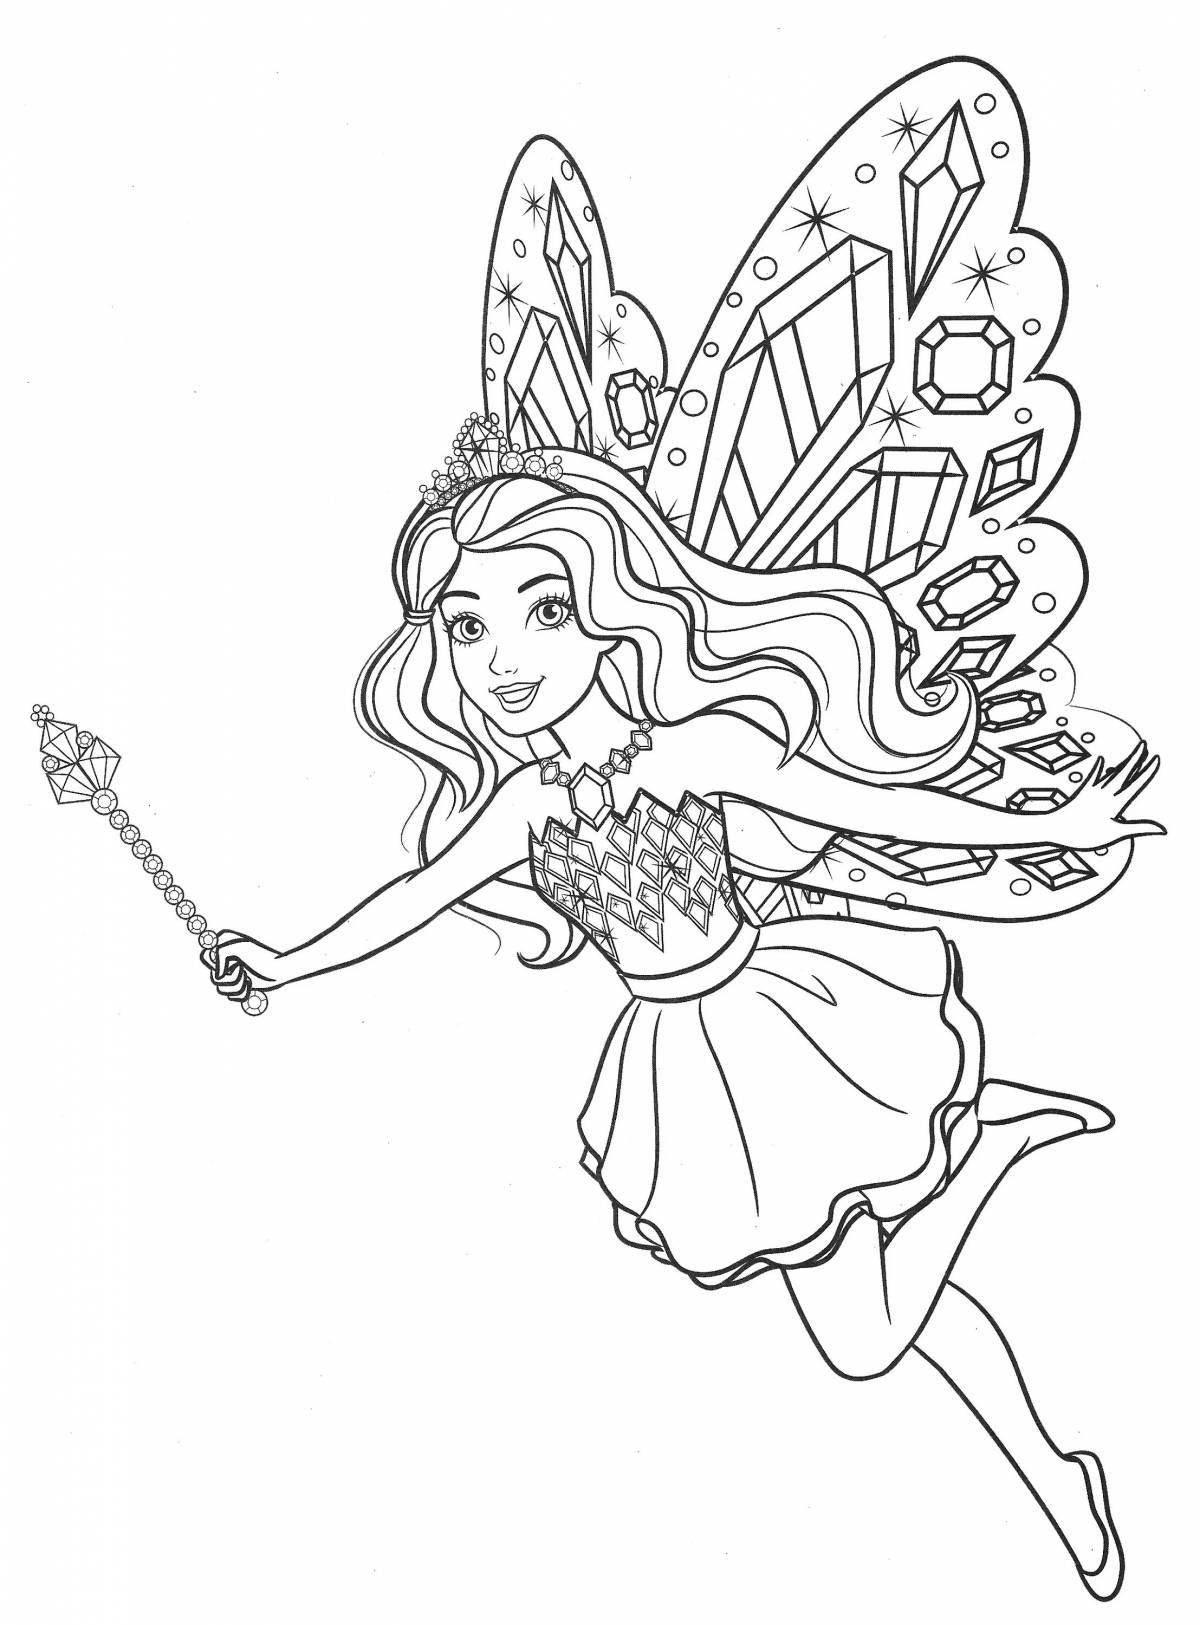 Fairy princess coloring pages